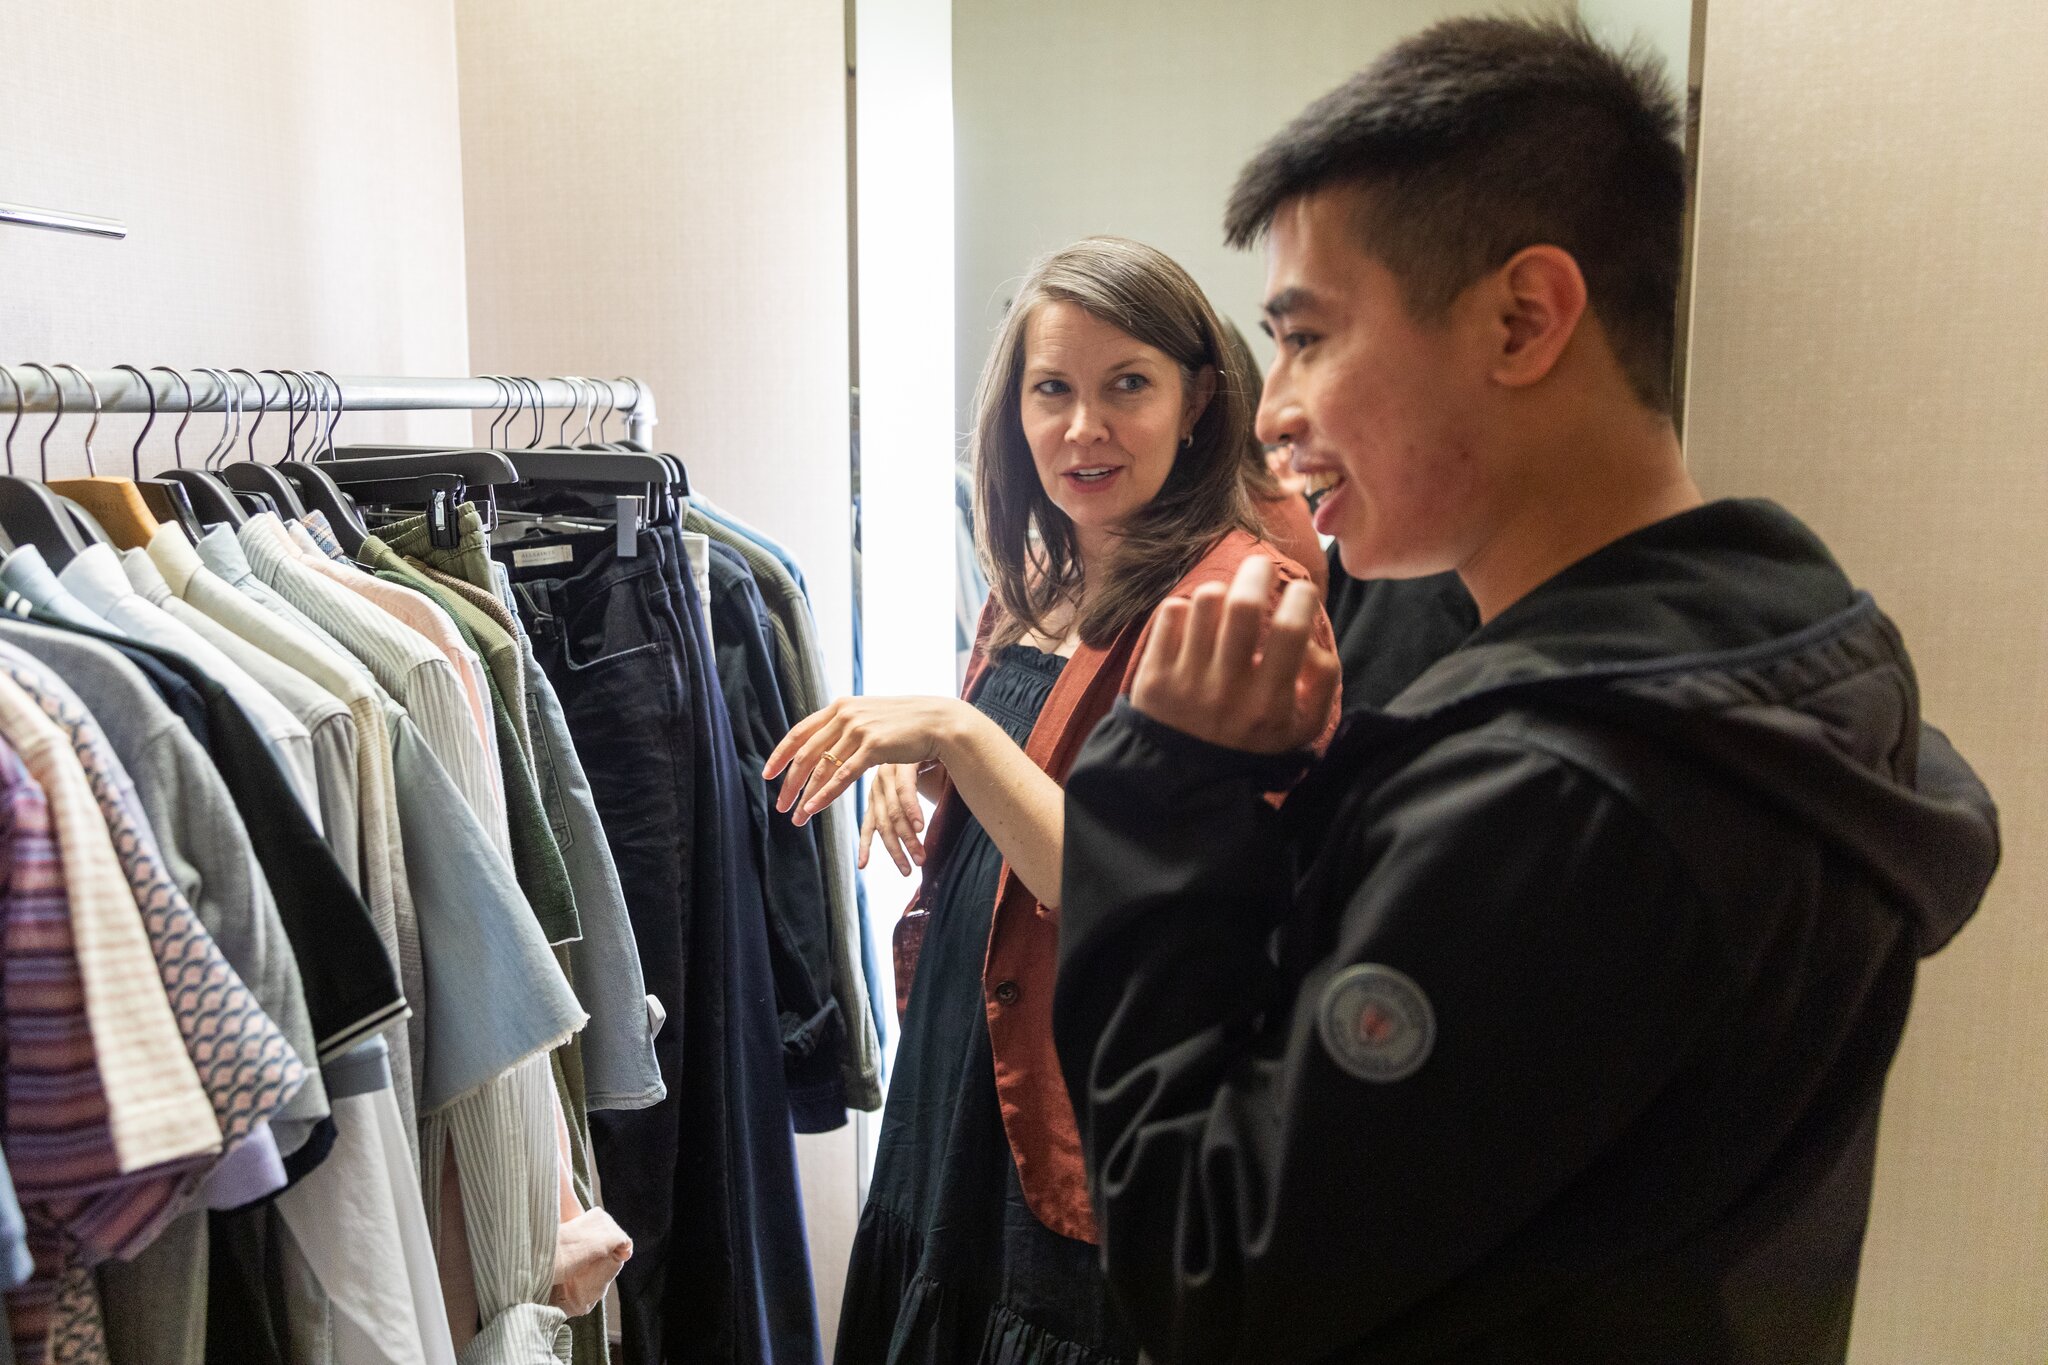 Two people are in a room with a clothing rack full of various garments. They are engaged in conversation, with one gesturing towards the clothes and the other smiling.